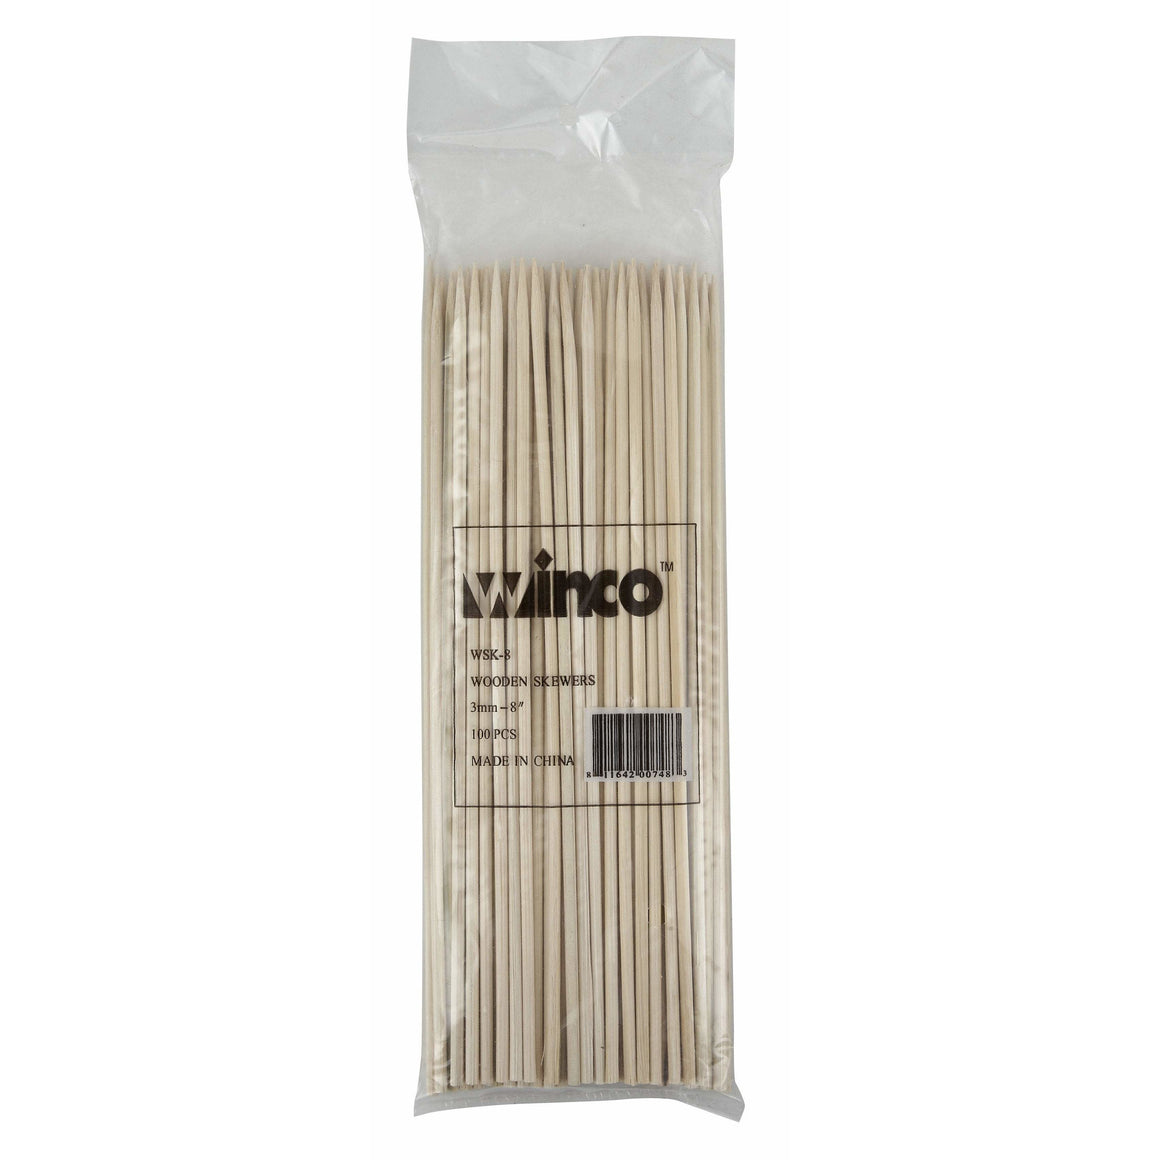 Winco - WSK-08 - 8" Bamboo Skewers, 100/bag - Kitchen Utensils - Maltese & Co New and Used  restaurant Equipment 